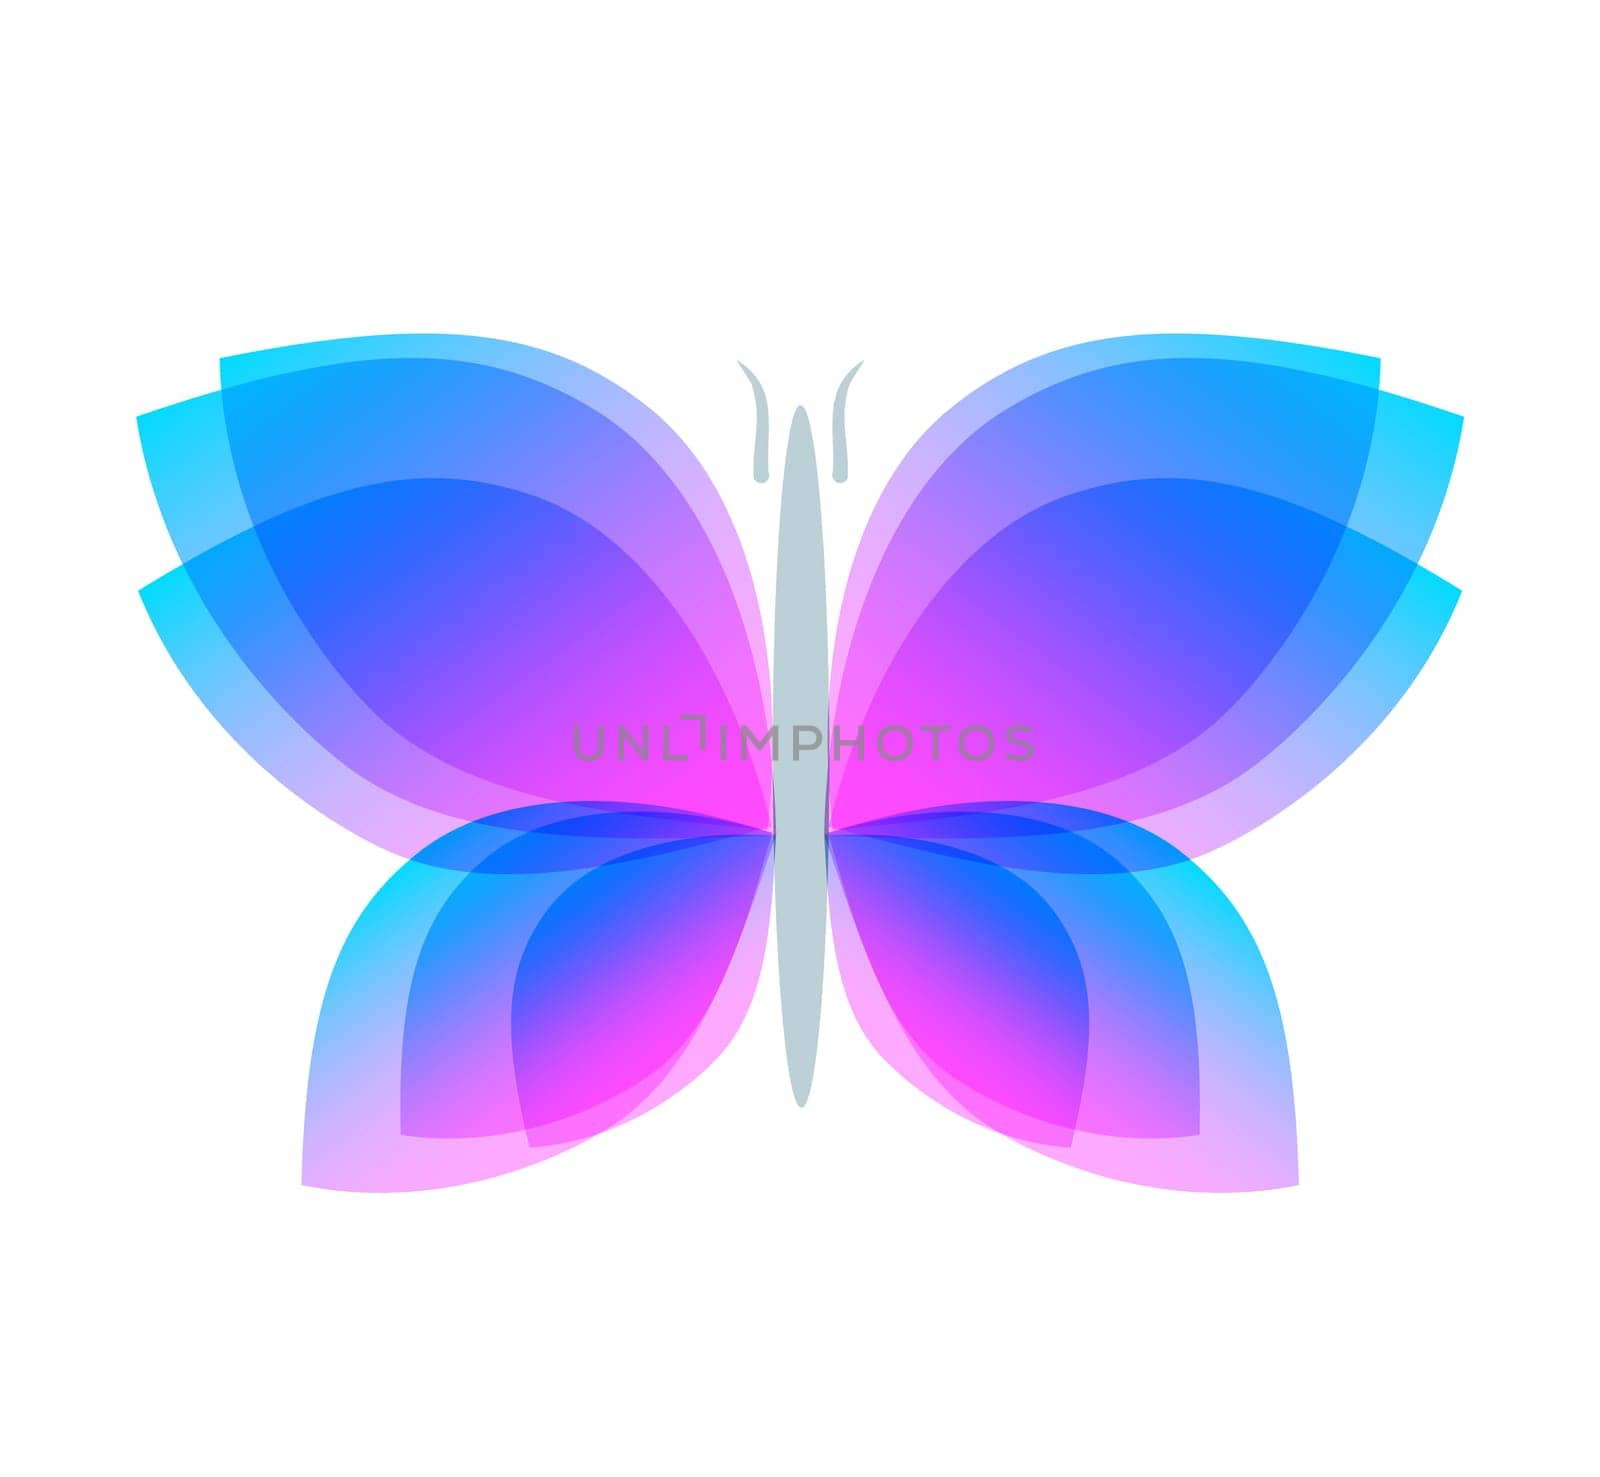 Watercolor butterfly with soft transition colors wings. Abstract flying insects logo template. Jpeg by Fyuriy